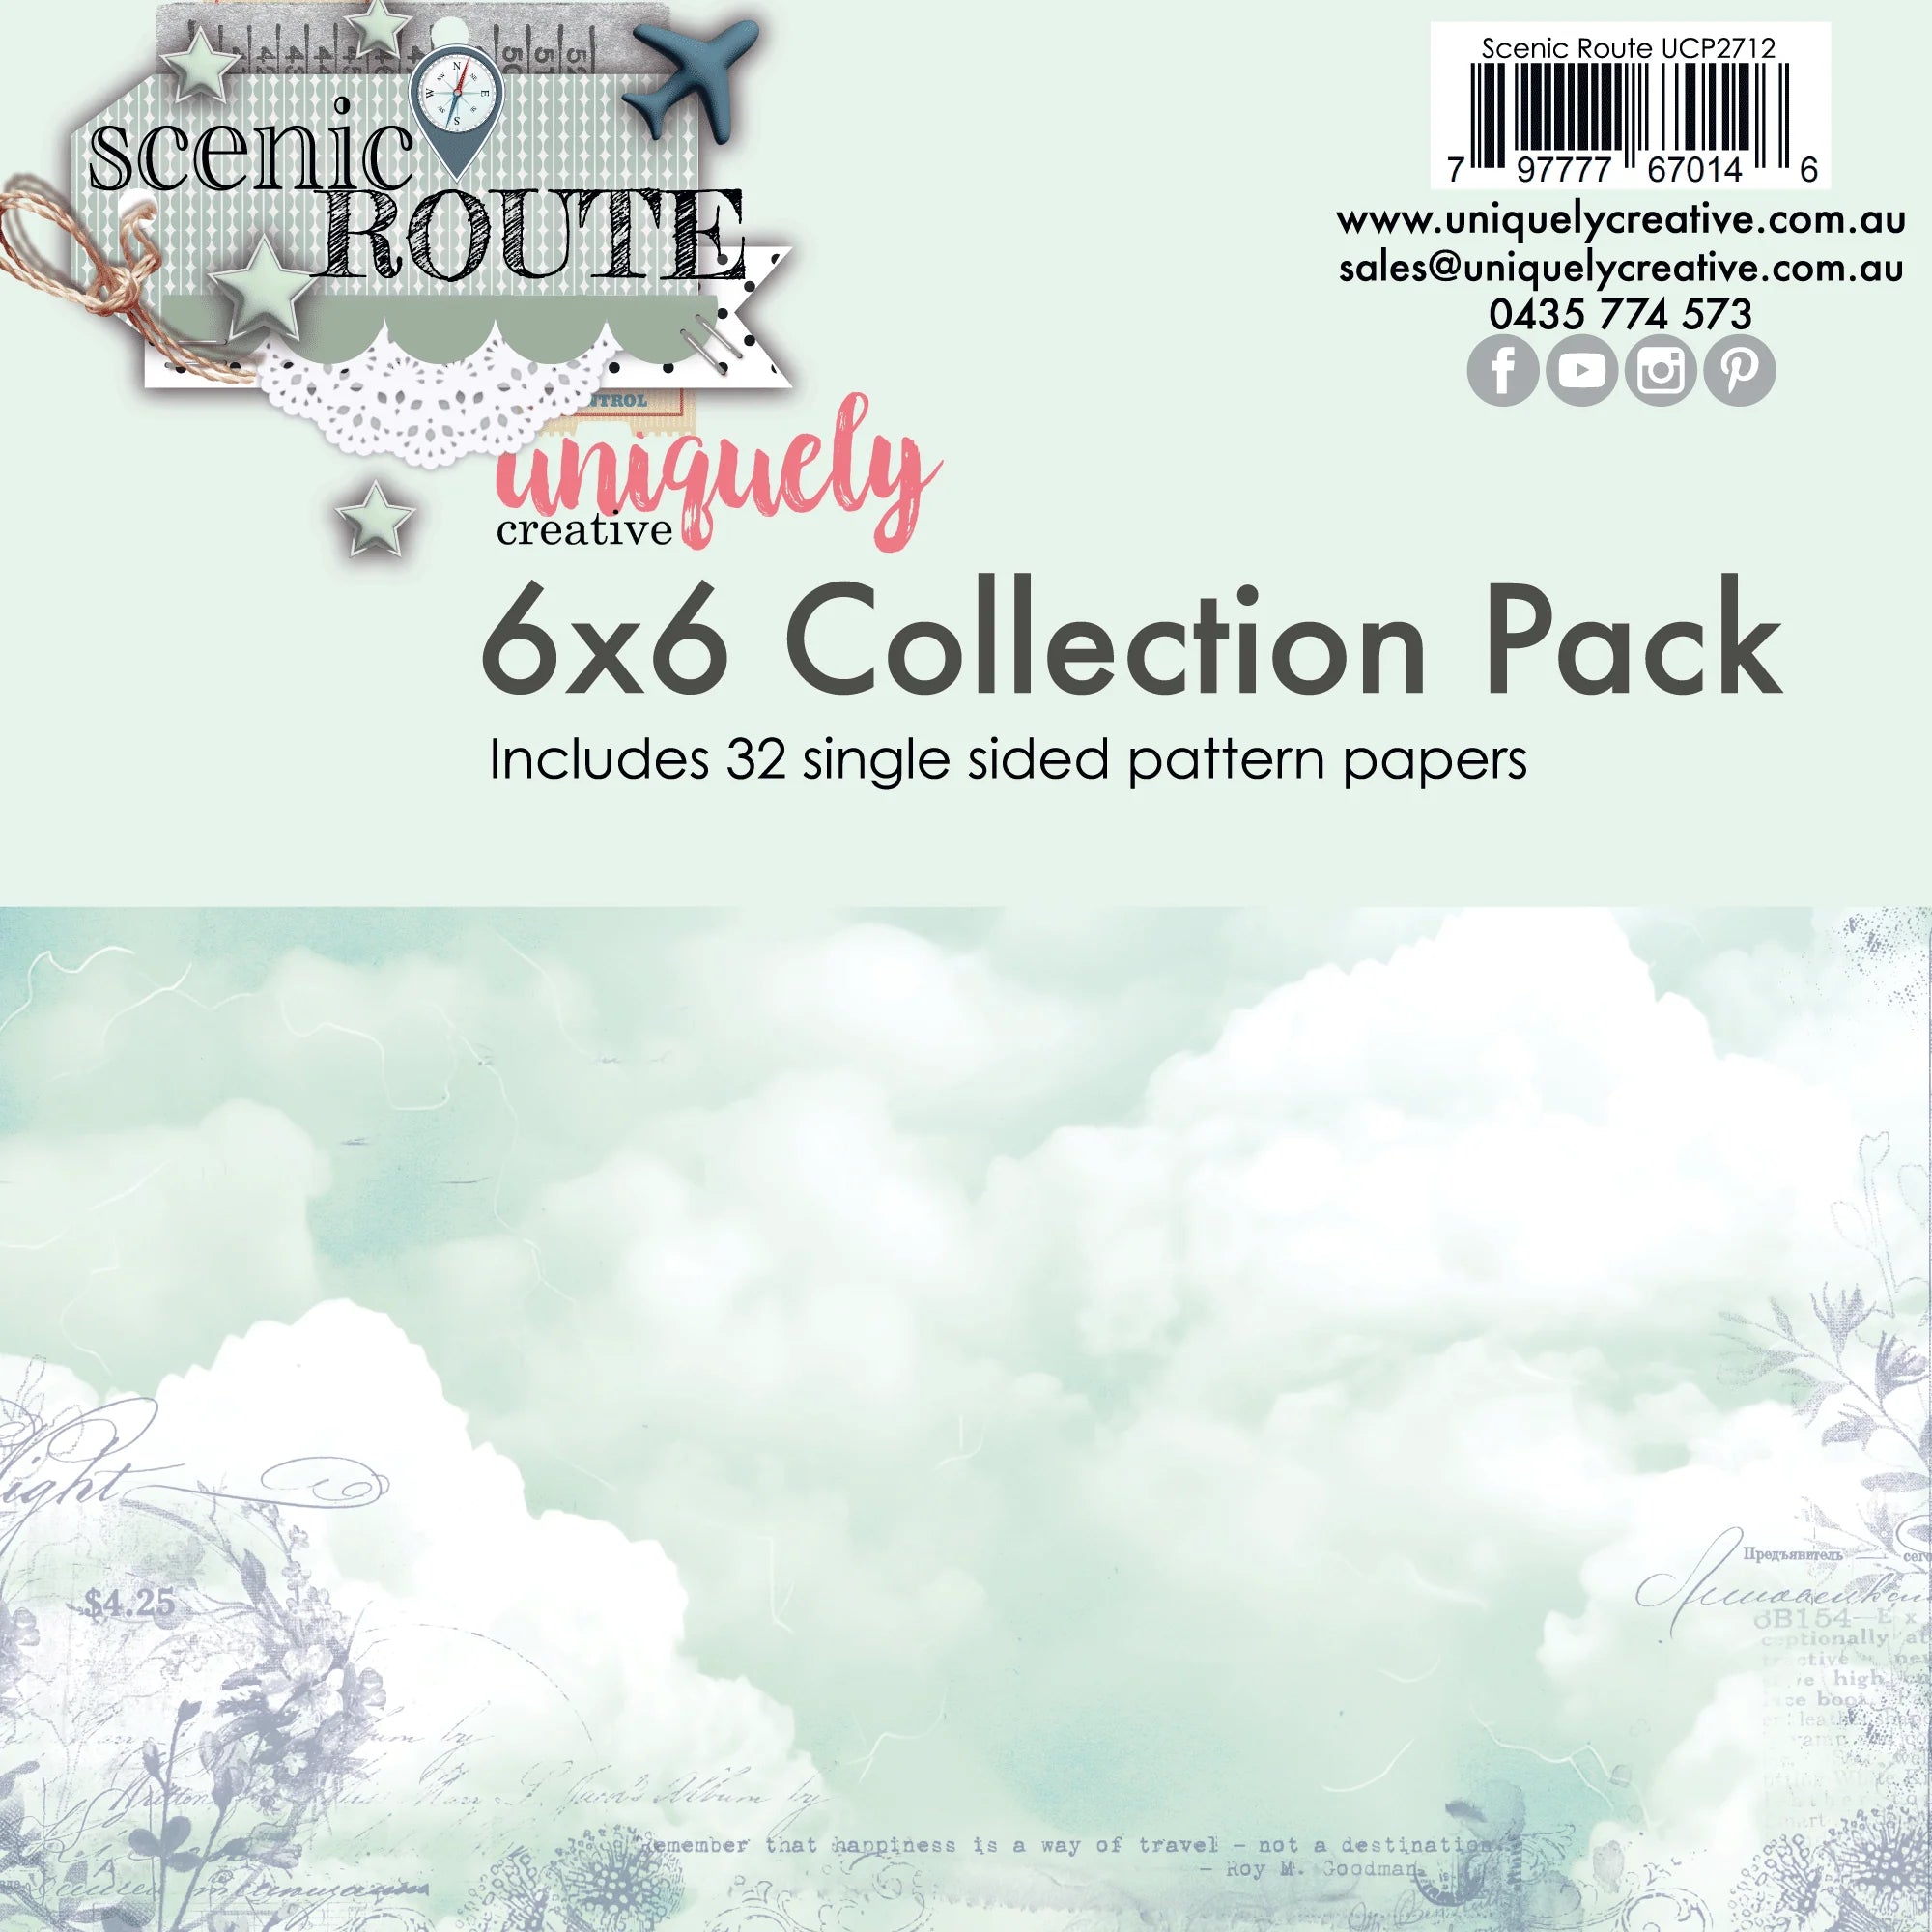 Uniquely Creative - 6x6 Collection Pack - Scenic Route